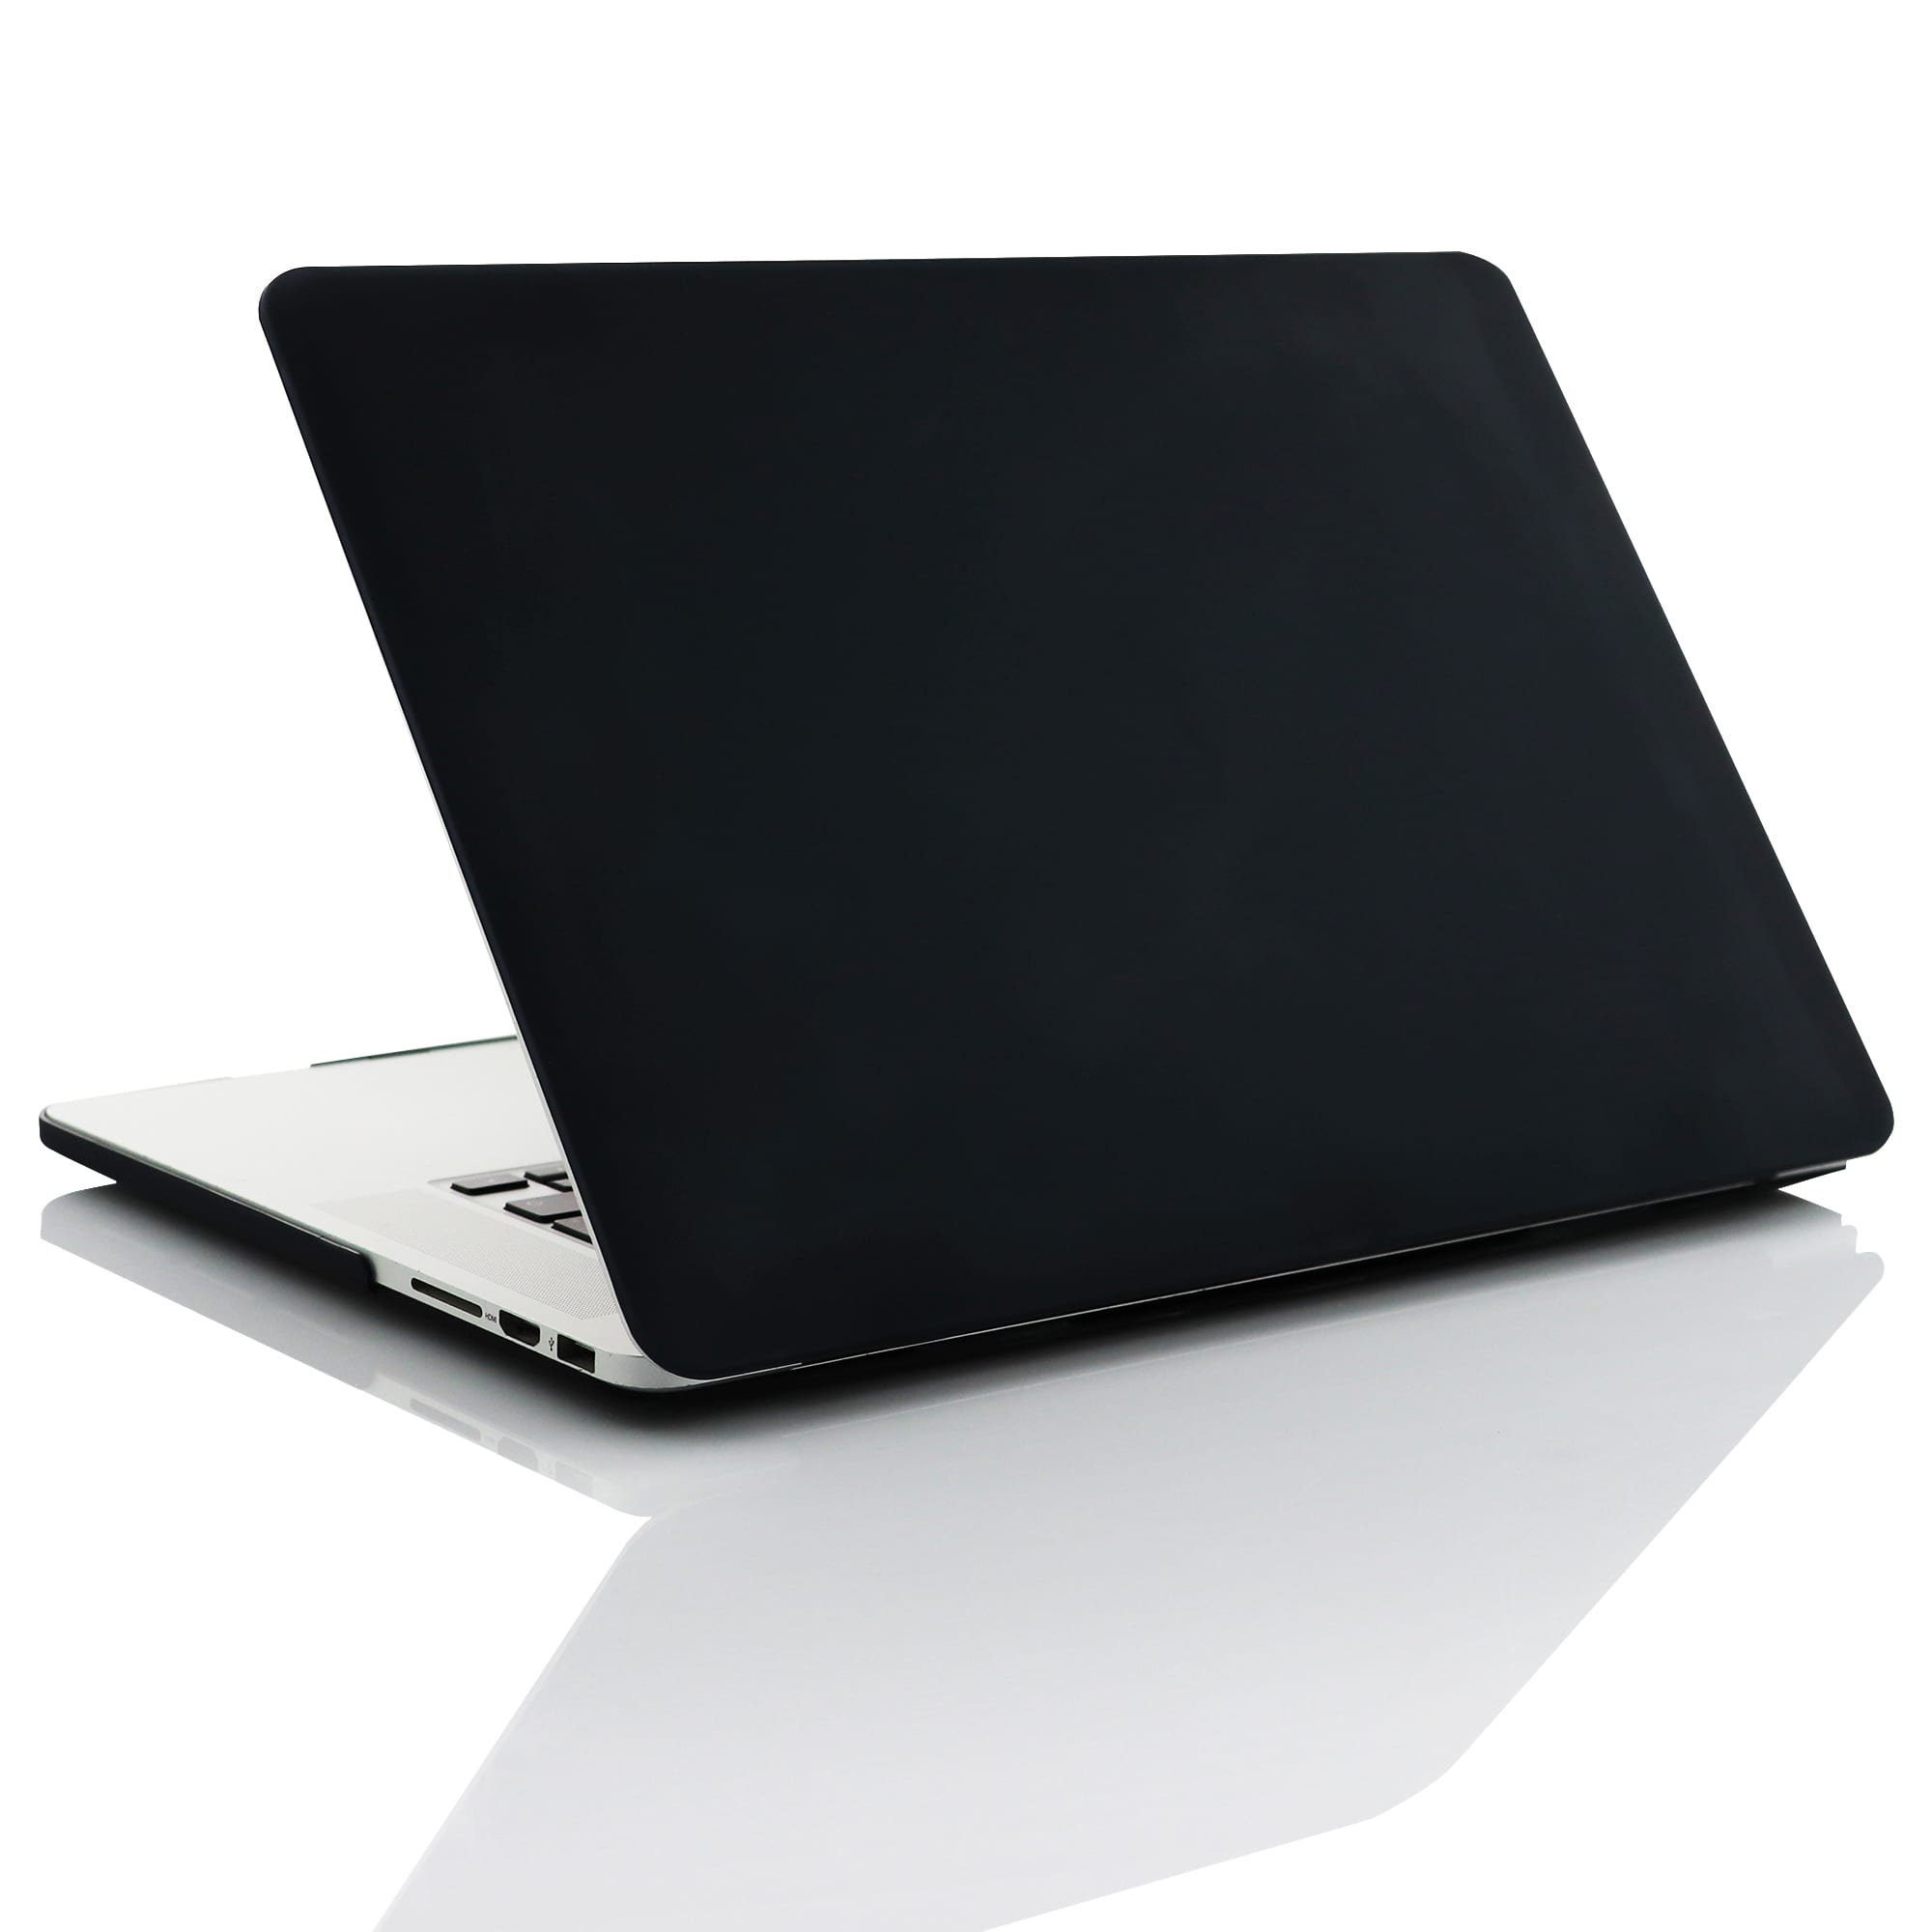 1 x NuGuard Snap-On Cover for 15-inch Retina